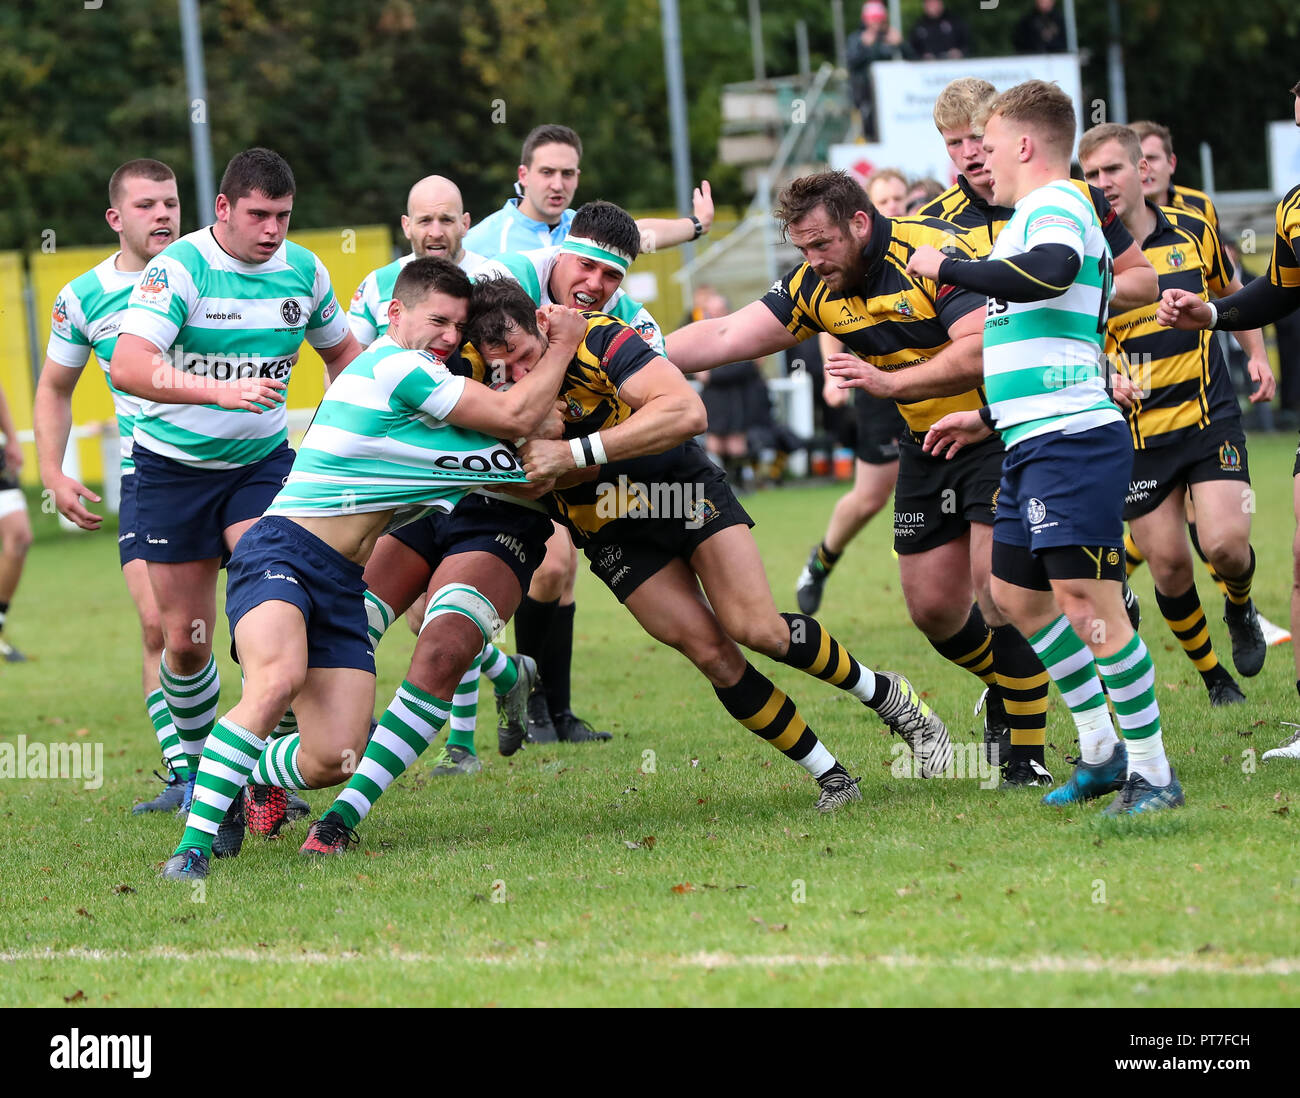 Leicester, England. Rugby Union, Hinckley rfc v South Leicester rfc.      Josh Smith goes over for Hinckley after 15 minutes  during the RFU National League 2 North (NL2N) game played at the Leicester  Road Stadium.  © Phil Hutchinson / Alamy Live News Stock Photo